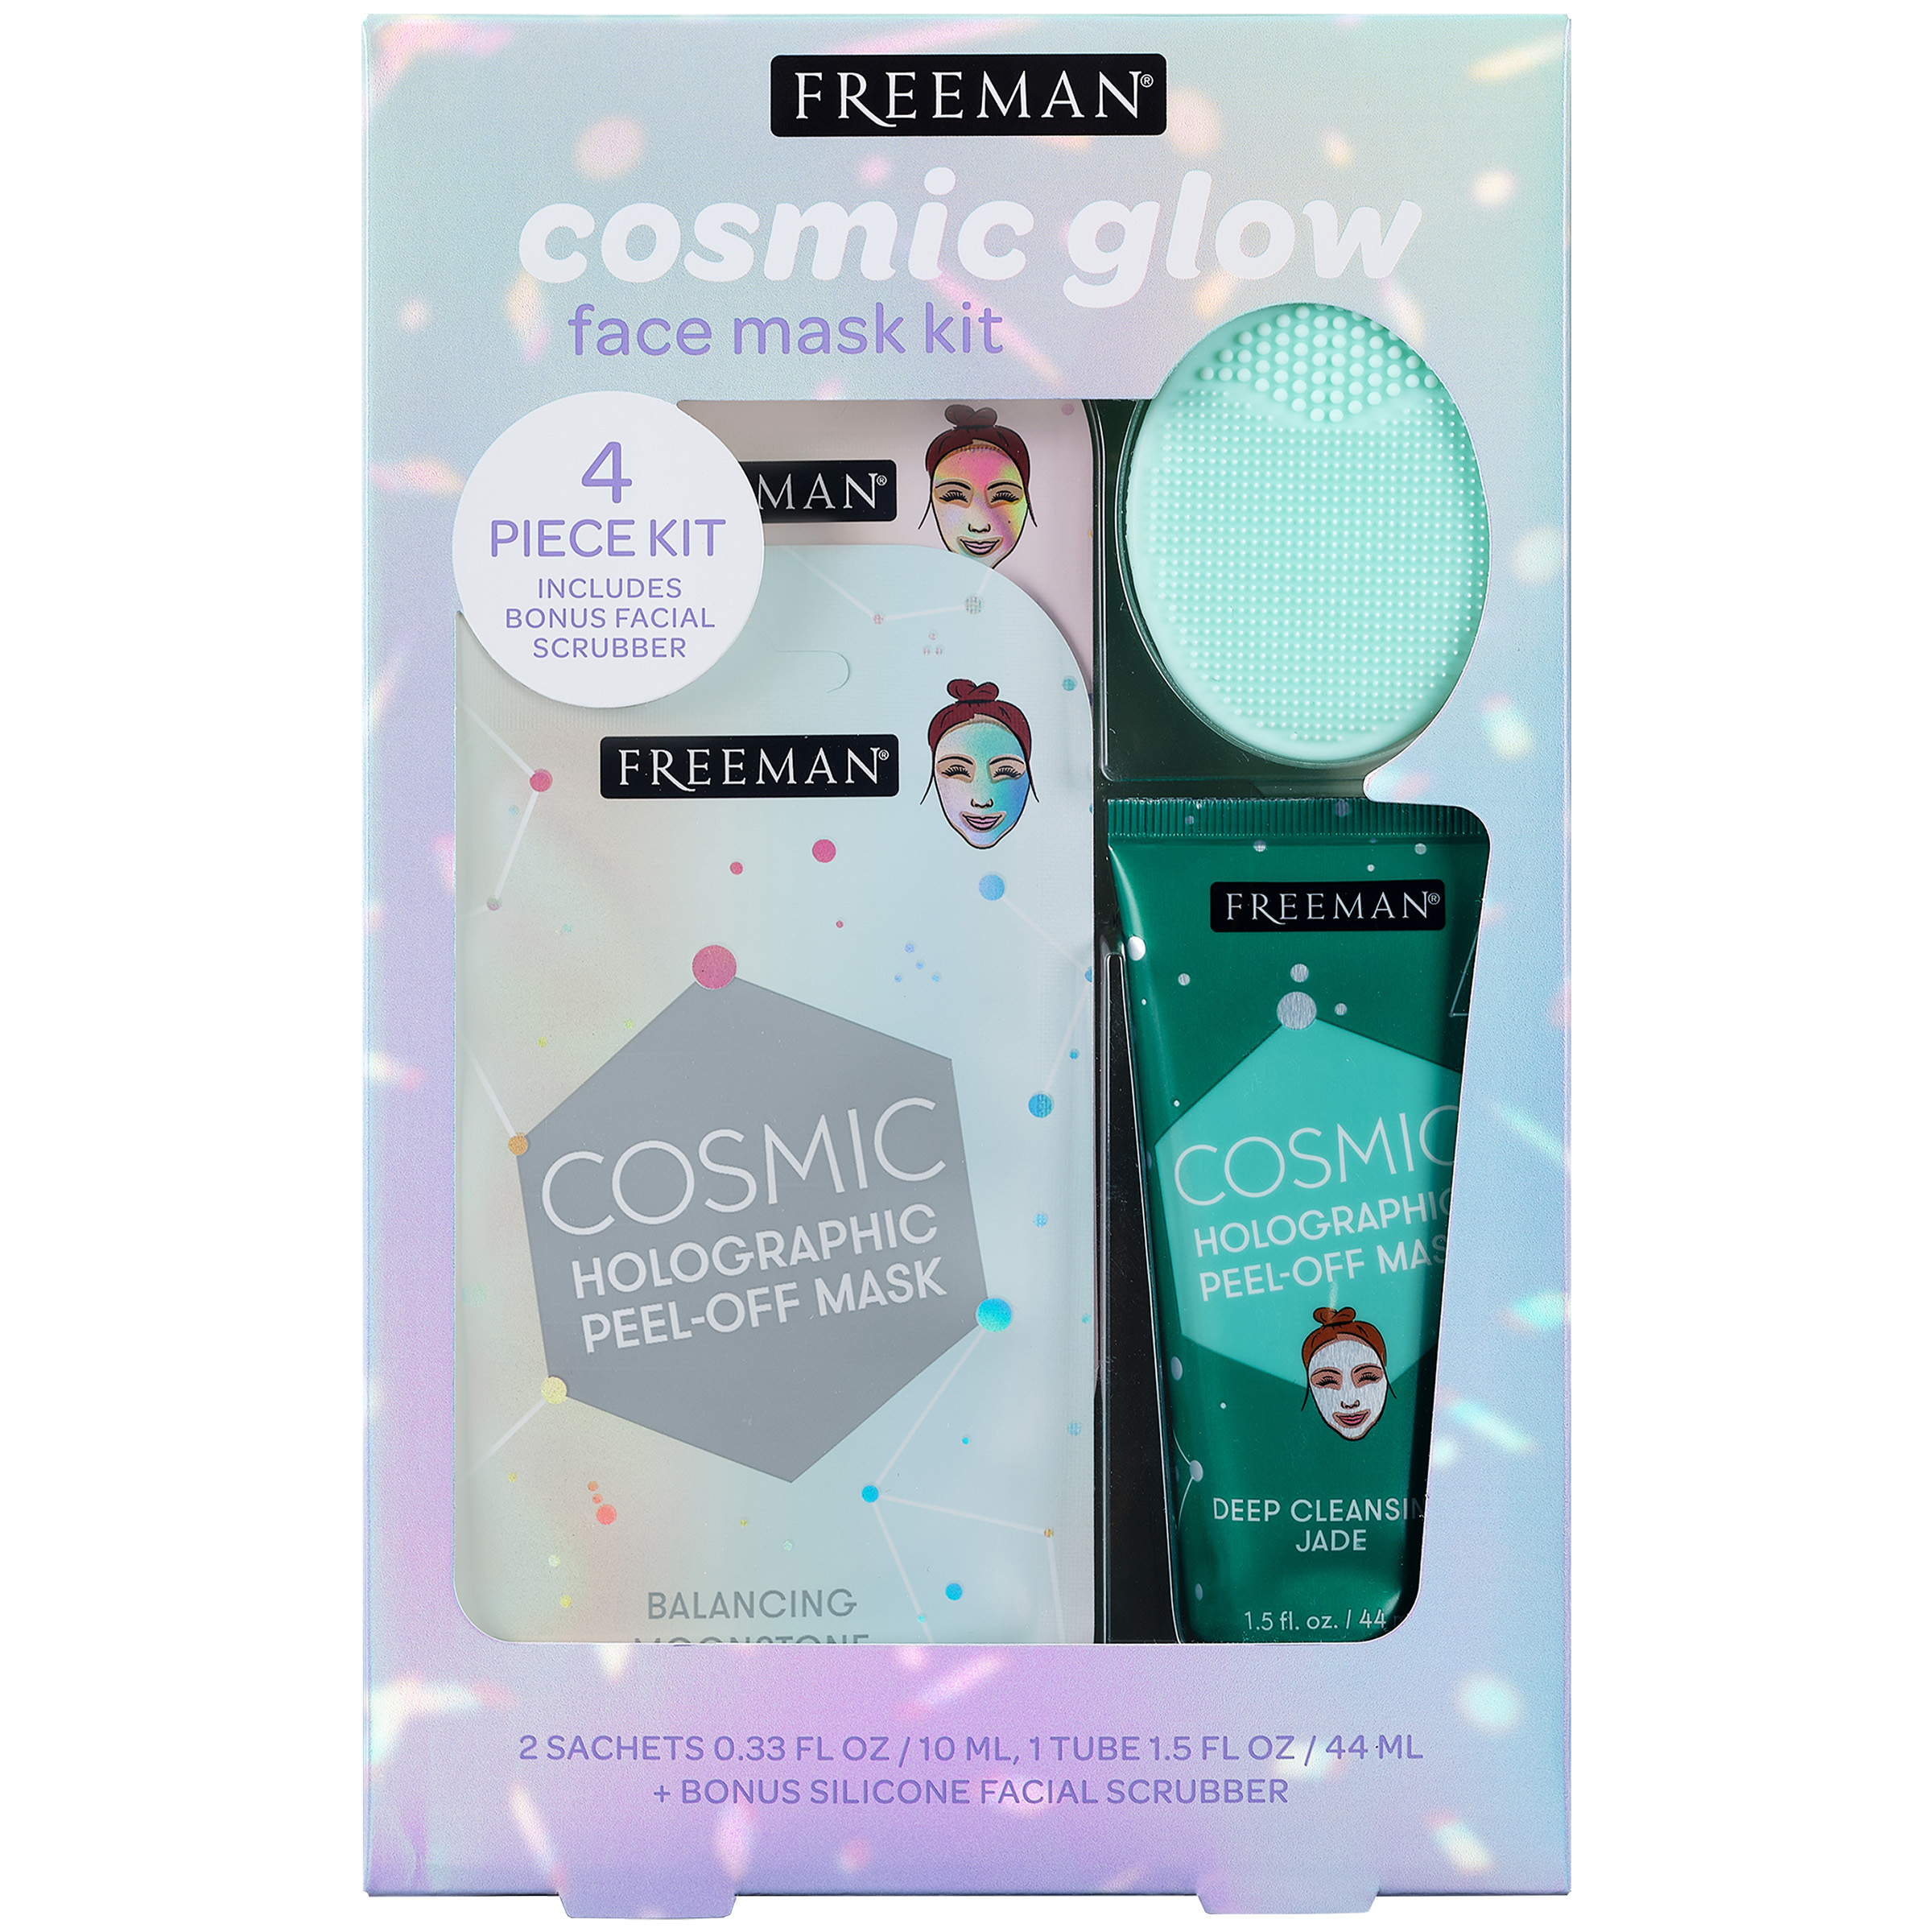 Freeman Limited Edition Cosmic Facial Mask Kit, Skincare Treatment Face Mask, 4 Piece Gift Set - image 1 of 6